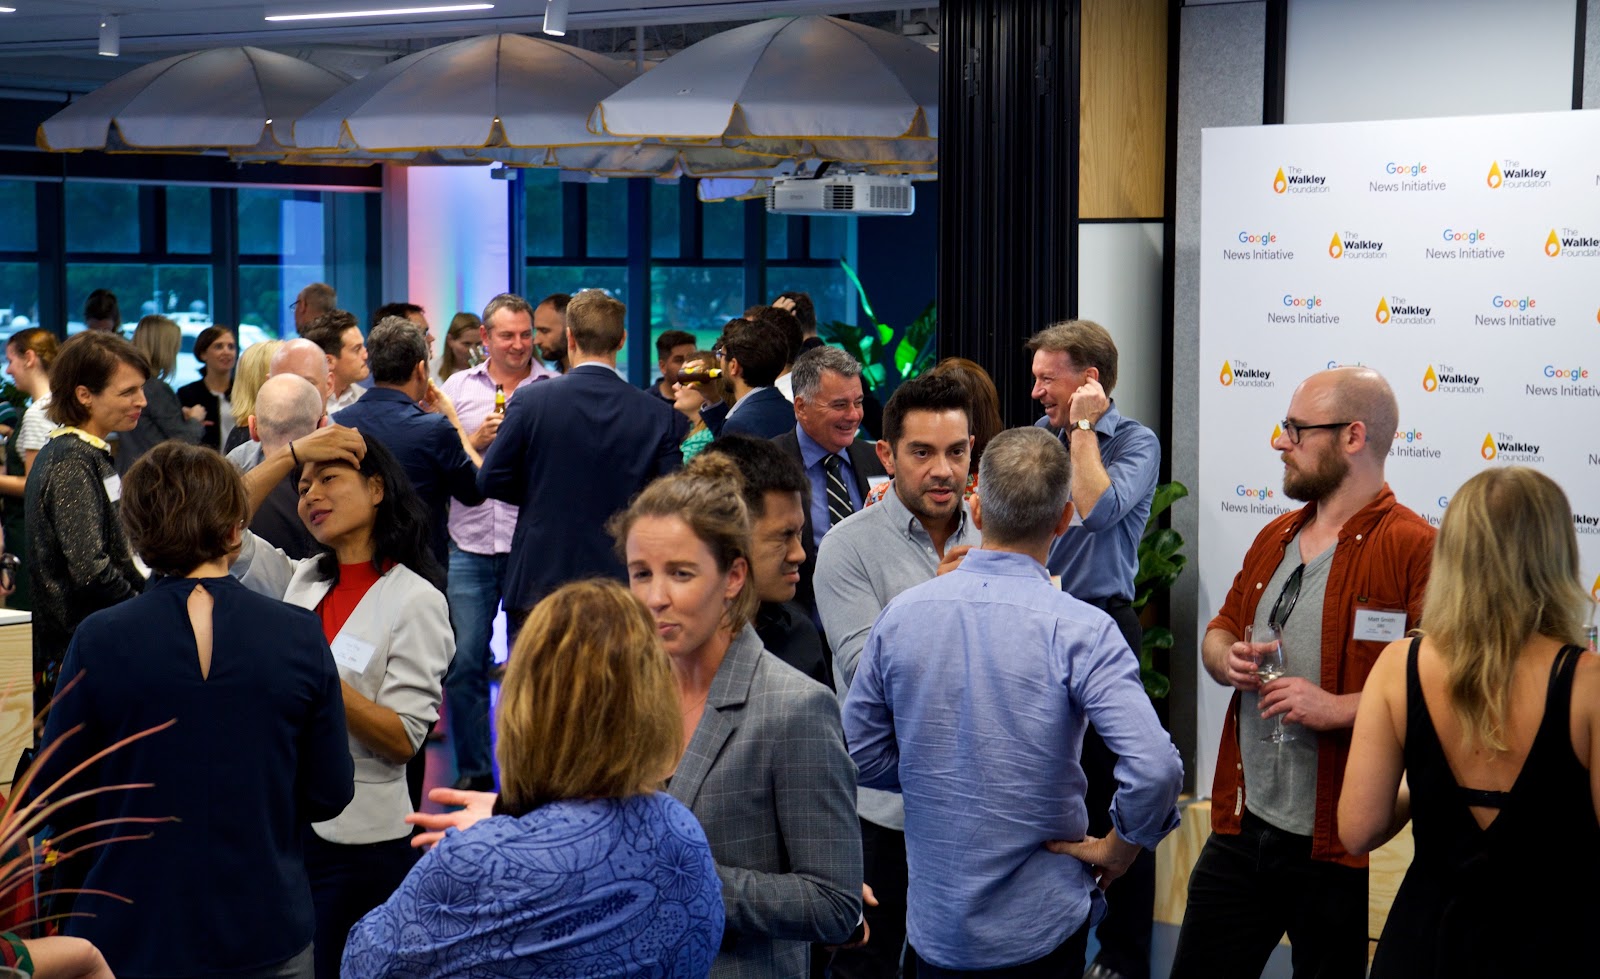 A photo showing attendees mingling at the Google News Initiative event